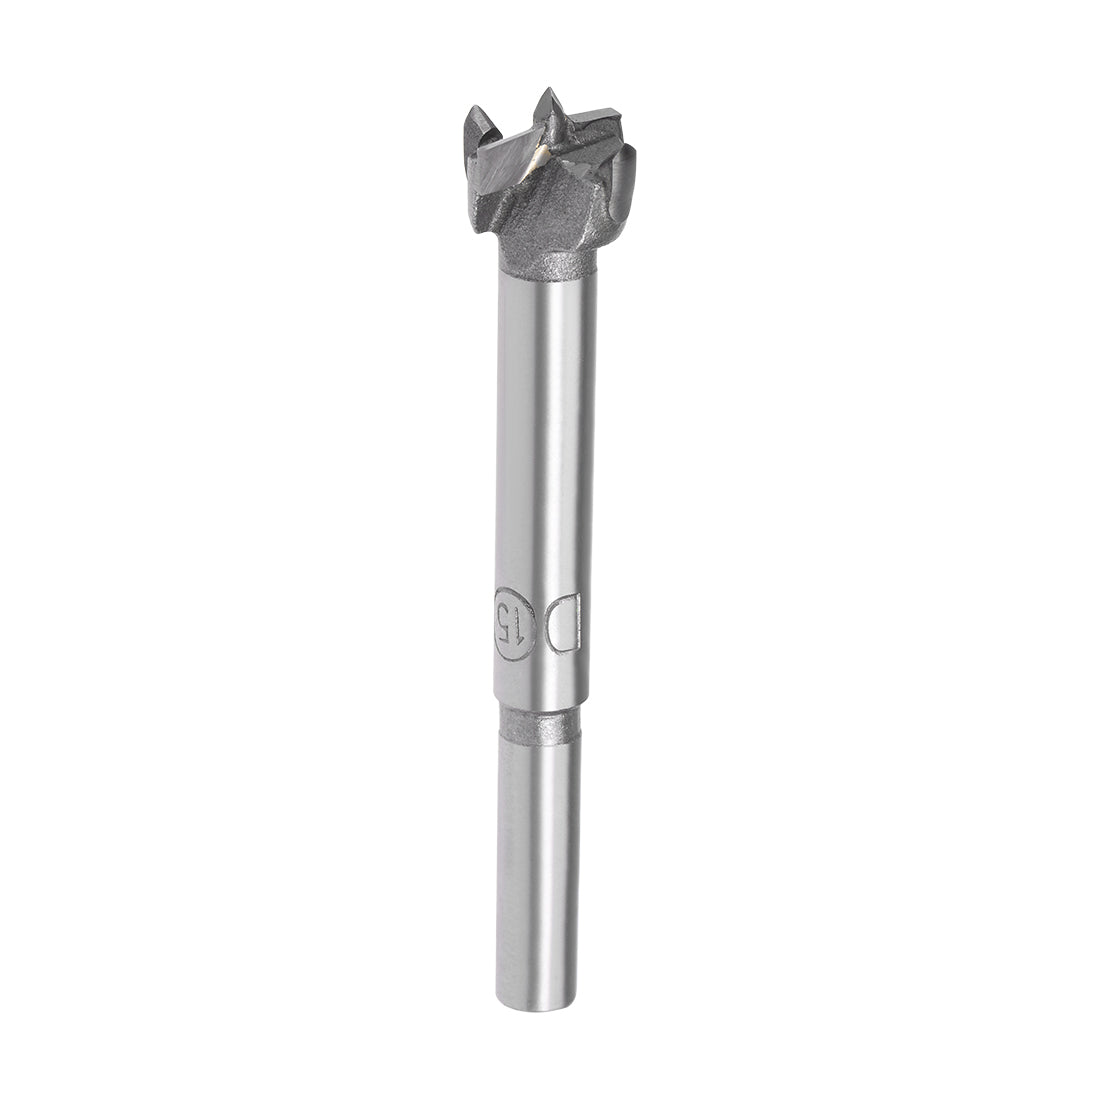 uxcell Uxcell Forstner Wood Boring Drill Bits 15mm Dia. Hole Saw Carbide Tip Round Shank Cutting for Hinge Plywood MDF CNC Tool